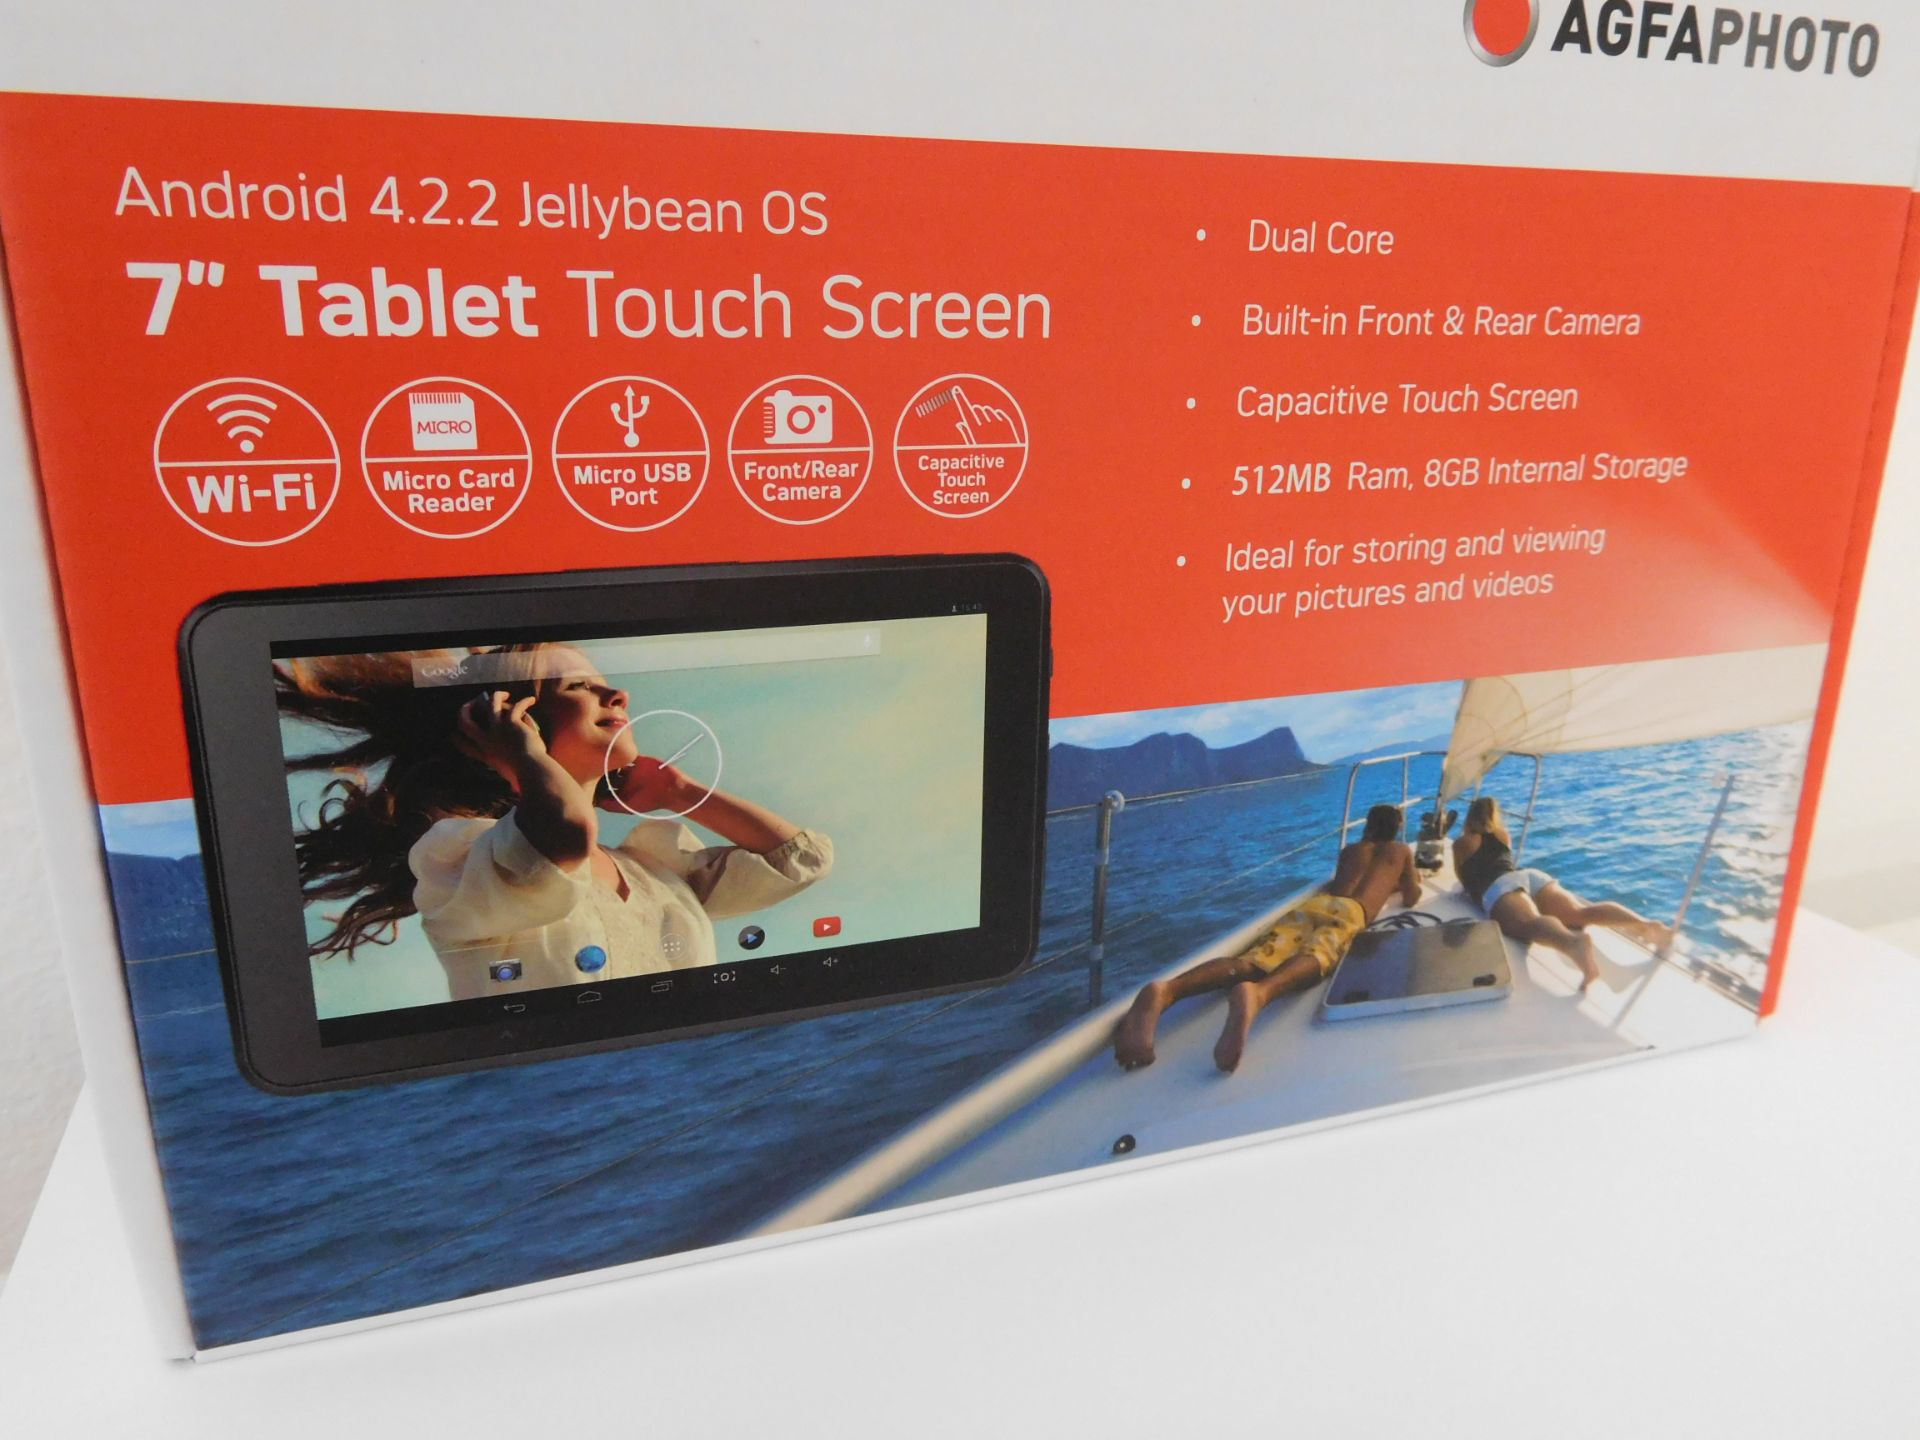 10 x AGFAPHOTO 7 Inch 4.2.2 Jellybean Operating System. Dual Core, Tablets. ORIGINAL RRP £129 - Image 2 of 6